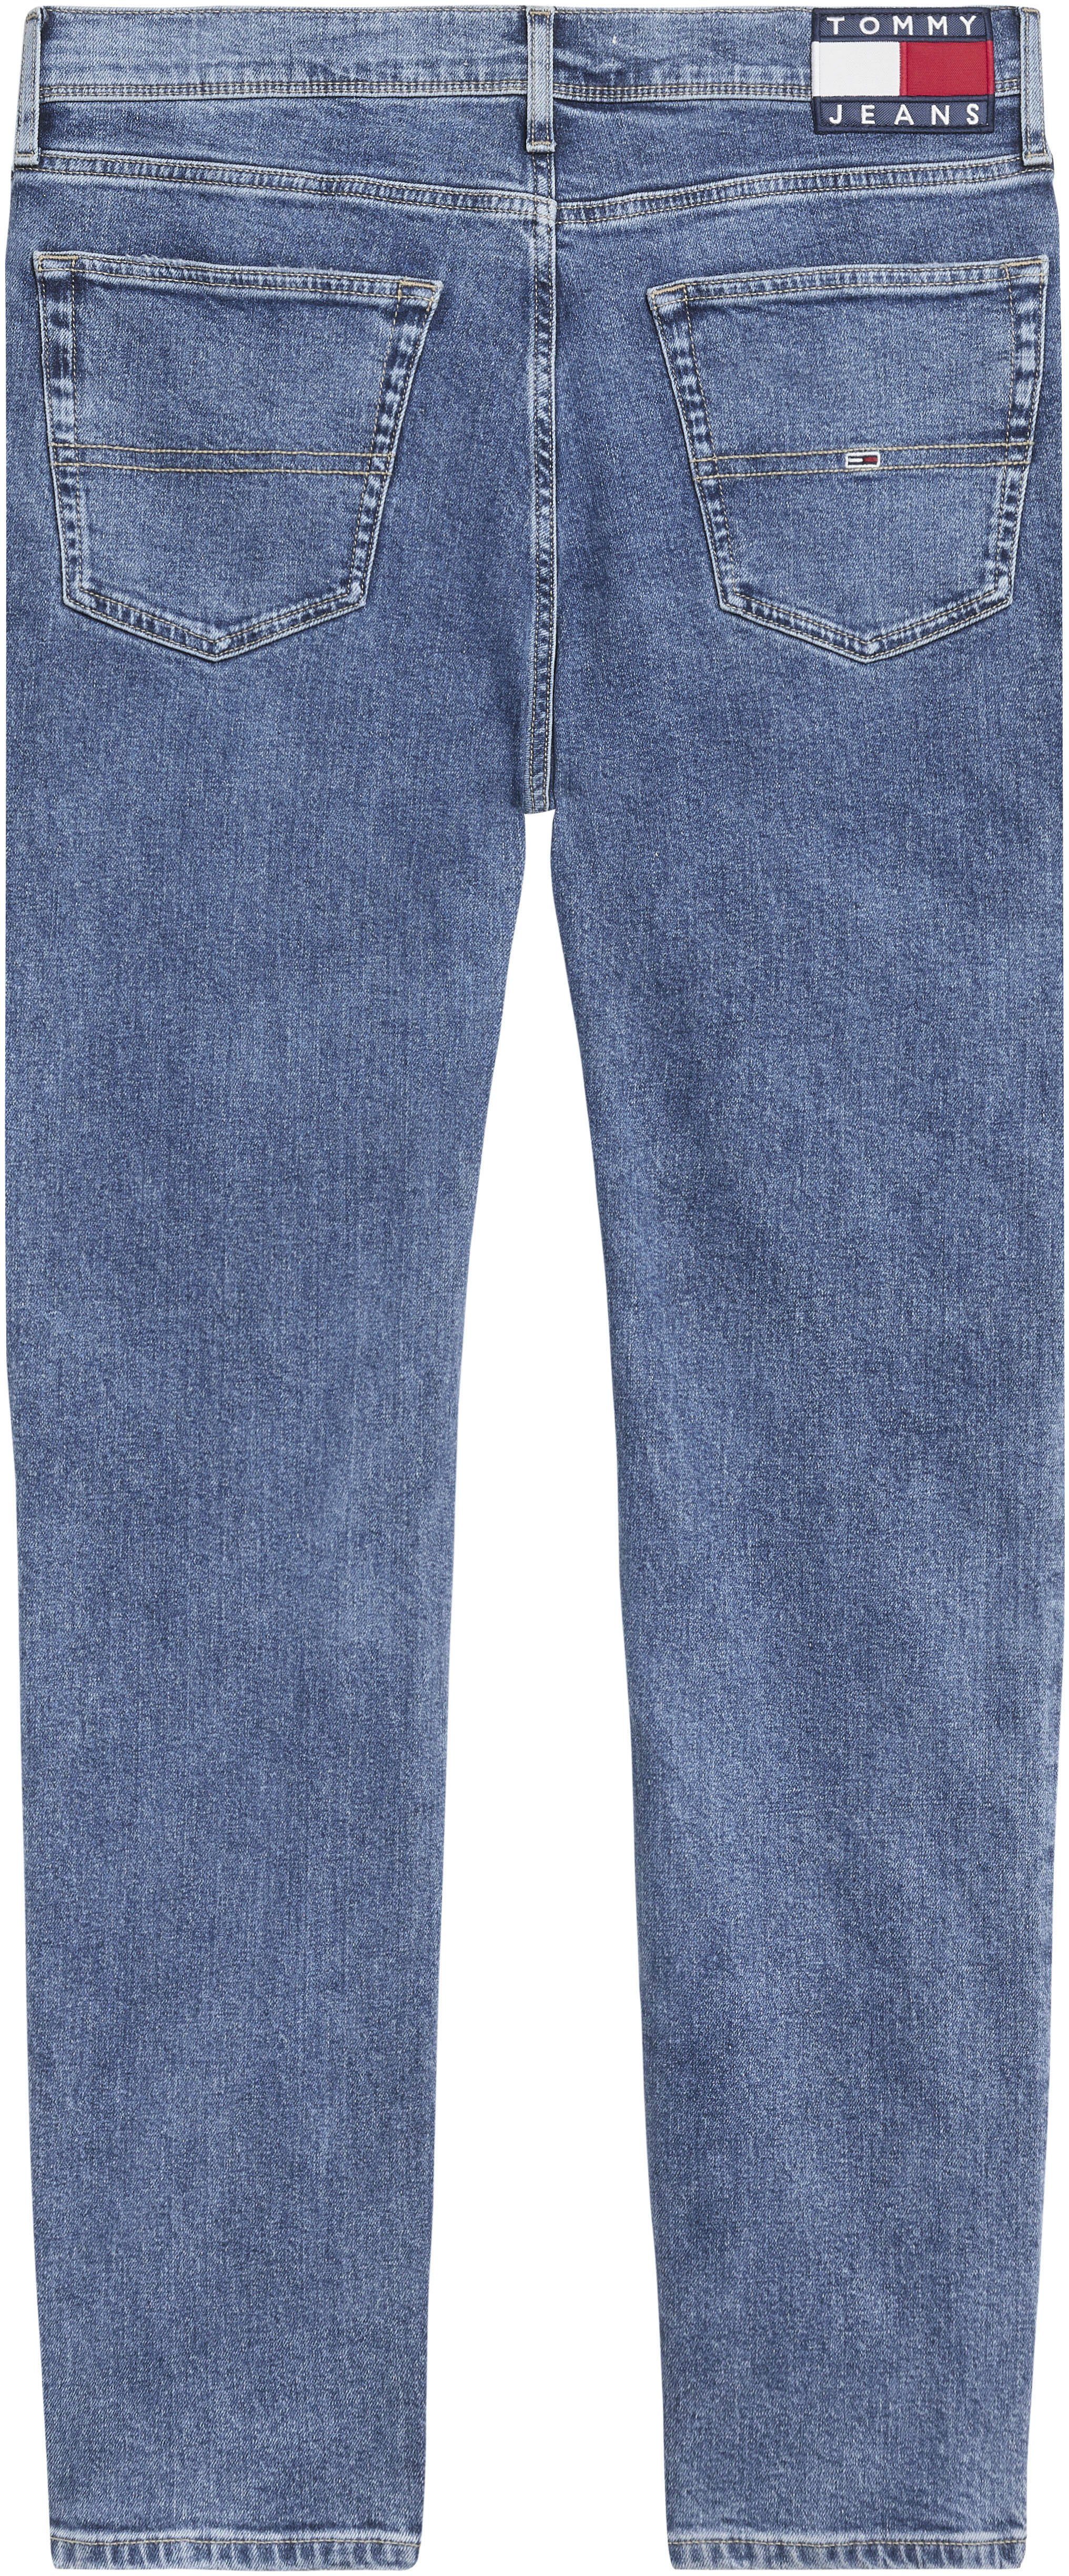 Jeans Tommy BG5017 Logostickerei (1-tlg) mit Jeans Tommy RLXD Relax-fit-Jeans Denim Medium STRGHT ETHAN